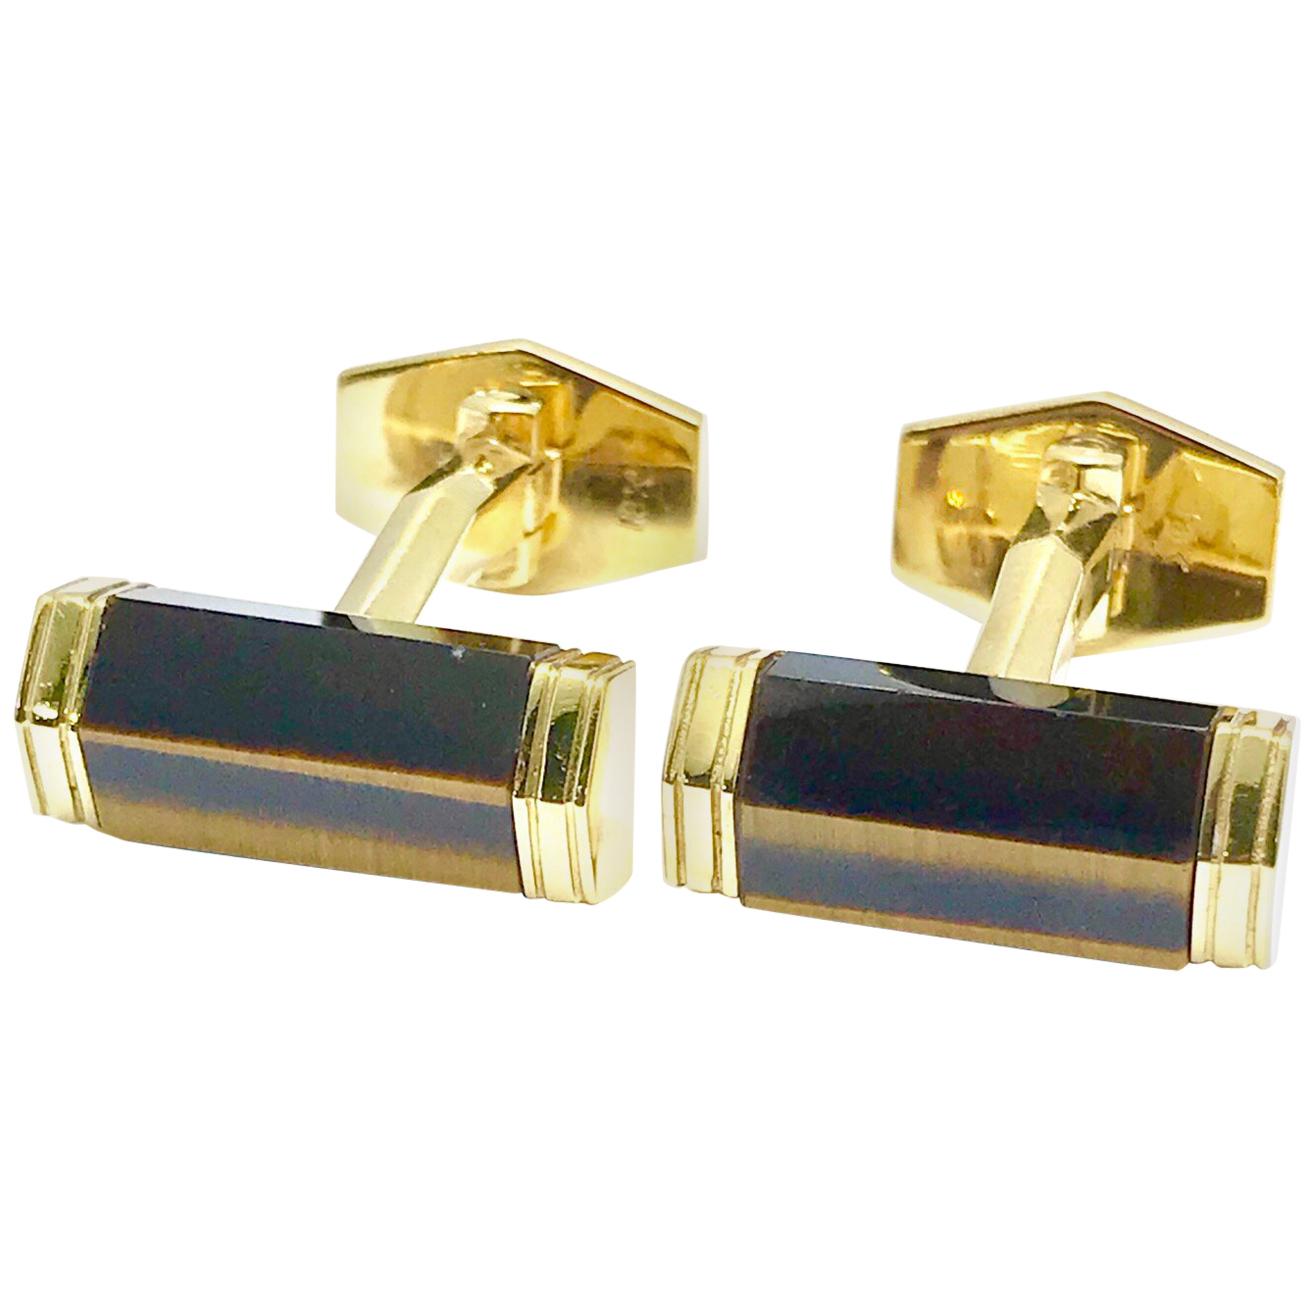 Tiger's Eye Quartz and 18 Karat Yellow Gold Cufflinks with a Toggle Back